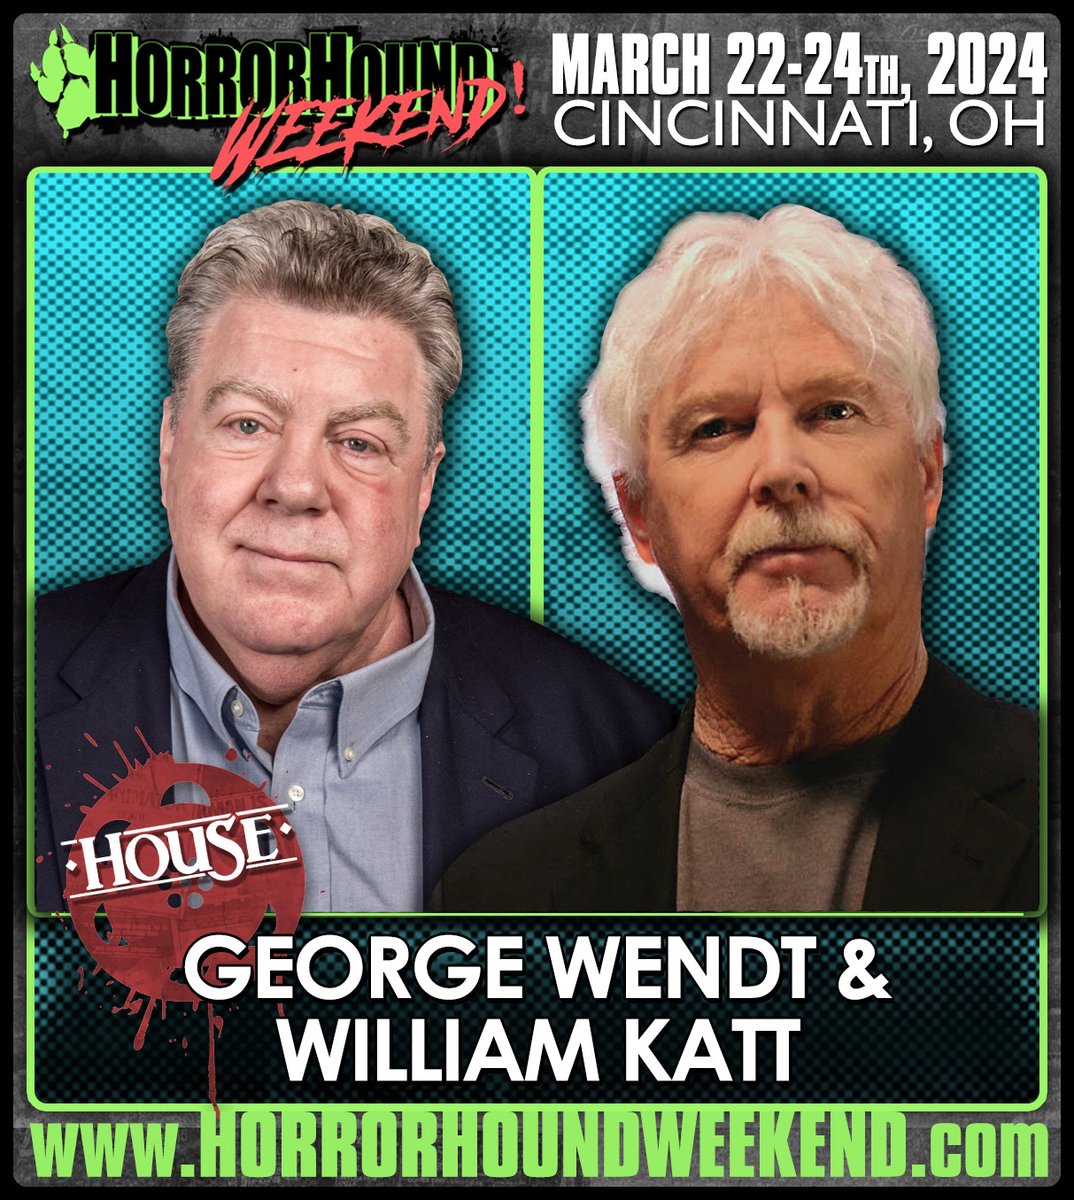 HorrorHound Weekend Cincinnati • March 22-24th, 2024 • Tickets now available @ horrorhoundweekend.com Meet the stars of 1985's HOUSE! George Wendt & William Katt Secure your Photo Op with the cast via bit.ly/3V5vU14 #cincinnati #house #carrie #cheers #beer #horror